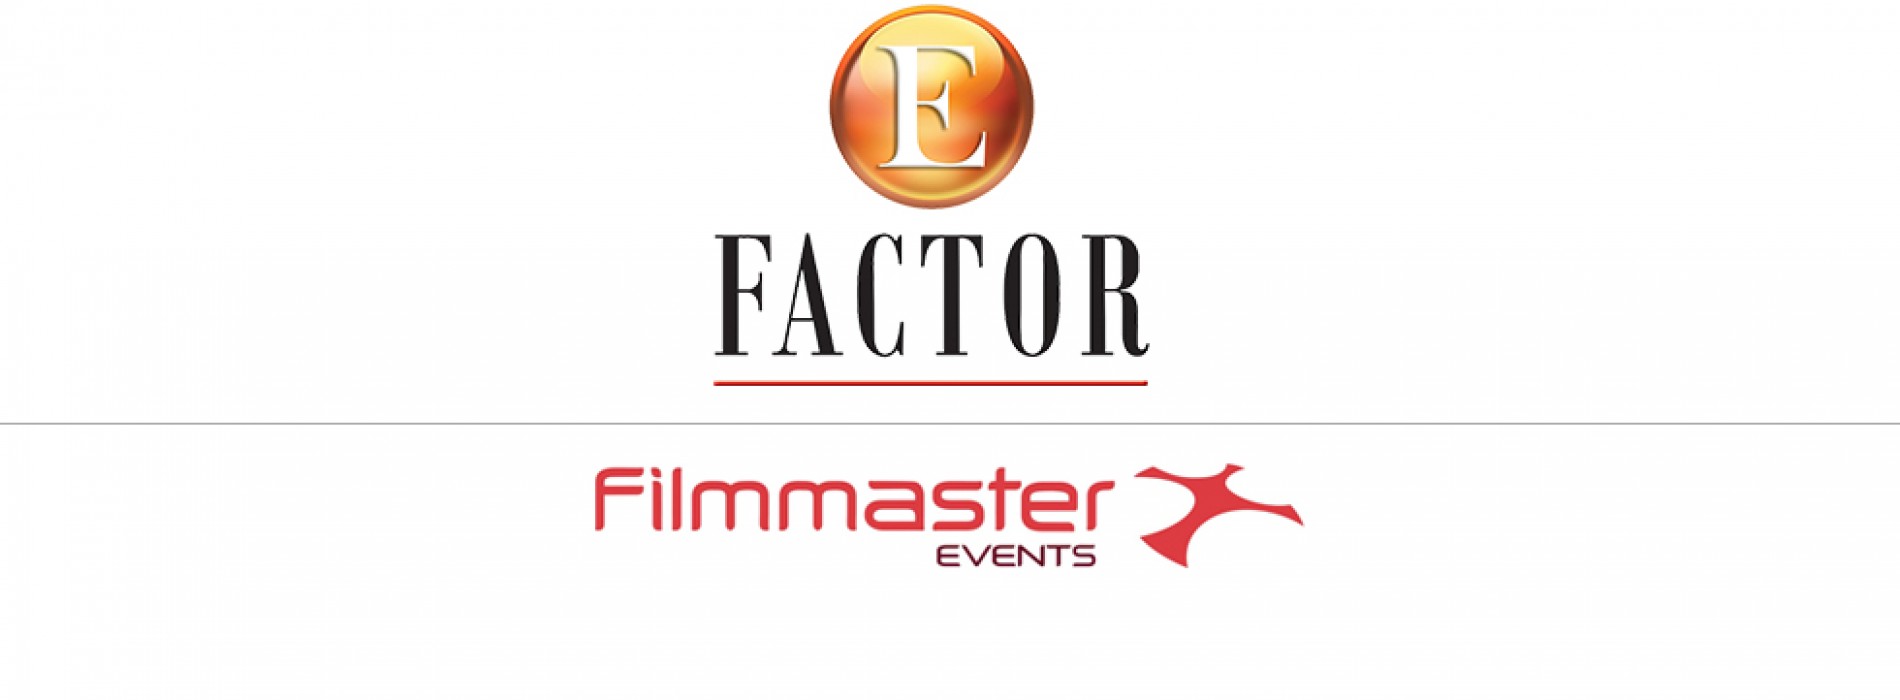 E Factor Entertainment and Filmmaster Events form joint venture with to introduce specialized events in India